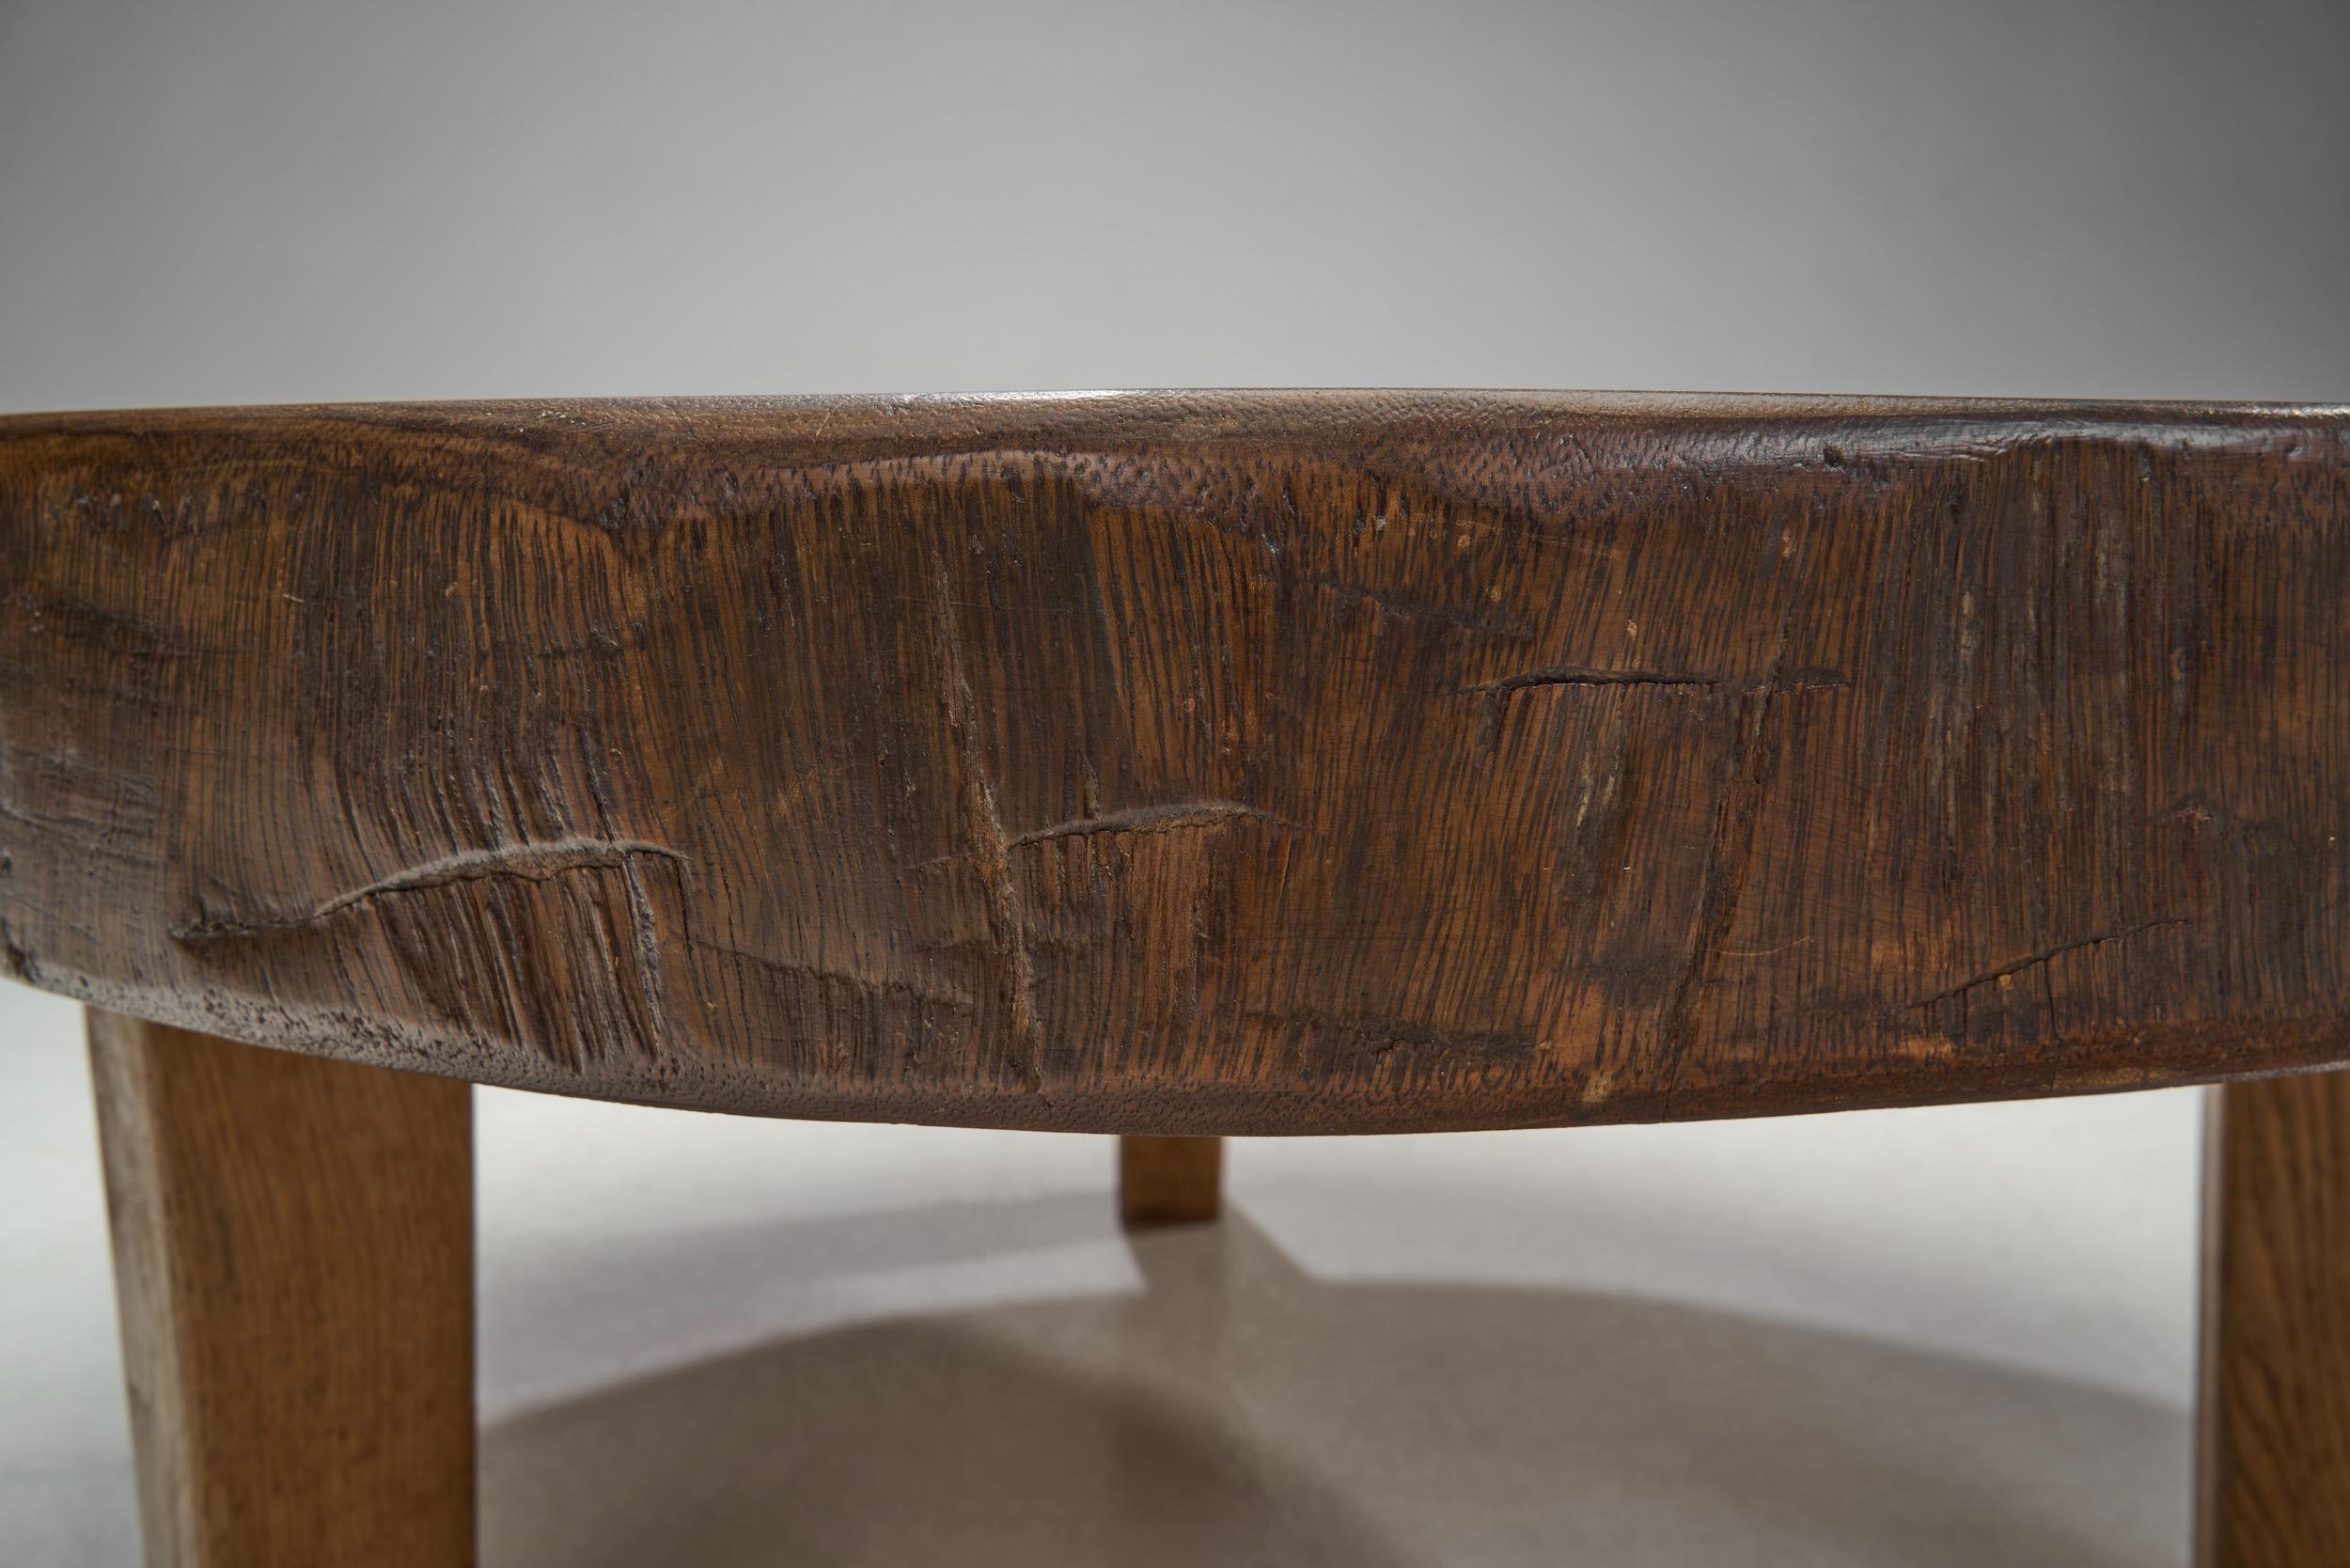 Midcentury Rustic Solid Wood Coffee Table, Europe, circa 1950s For Sale 8